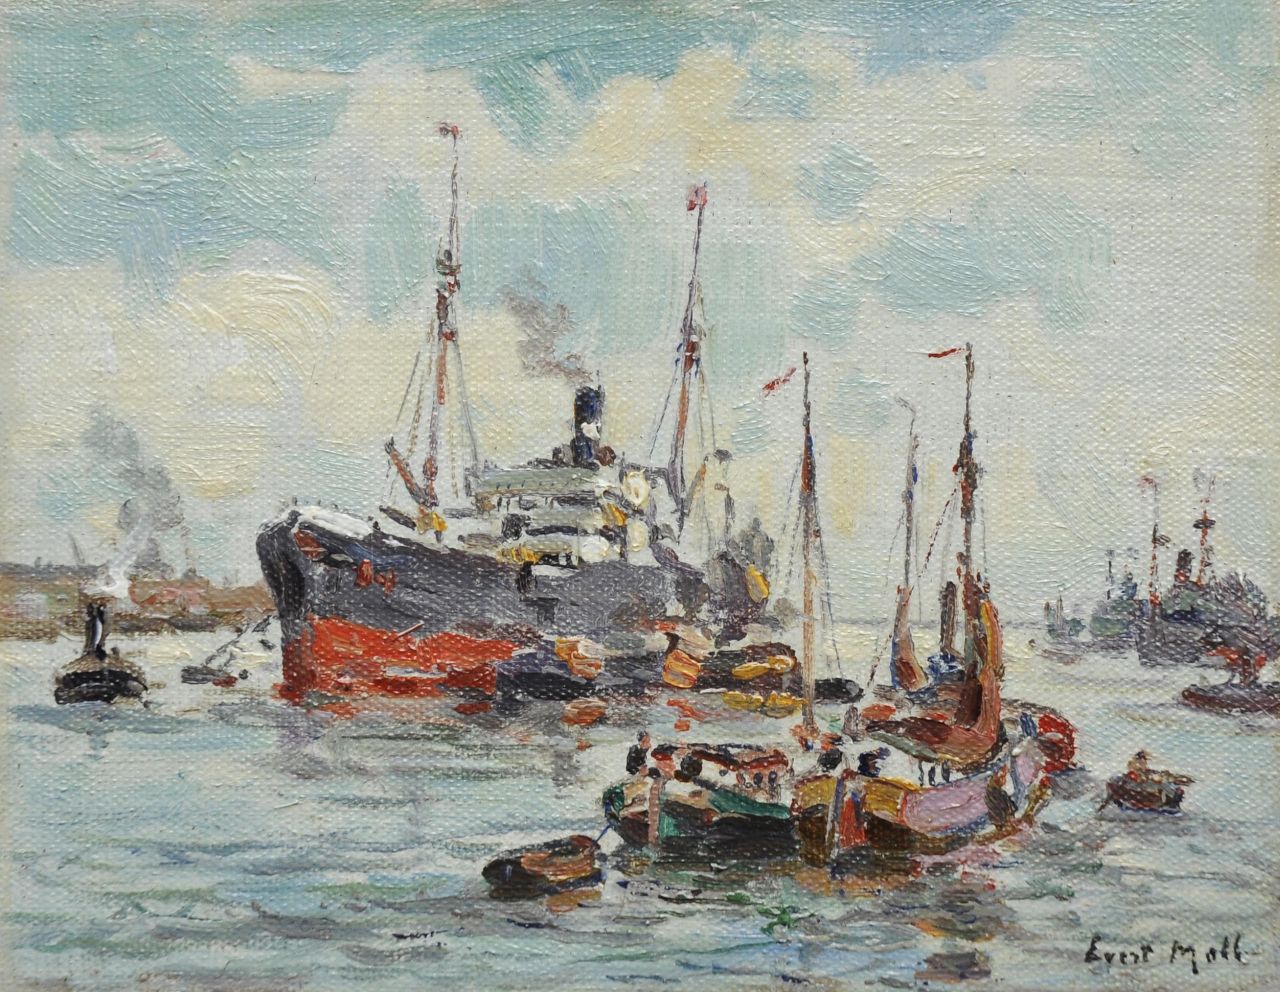 Moll E.  | Evert Moll, Rotterdam harbour, oil on canvas laid down on panel 11.2 x 14.3 cm, signed l.r.